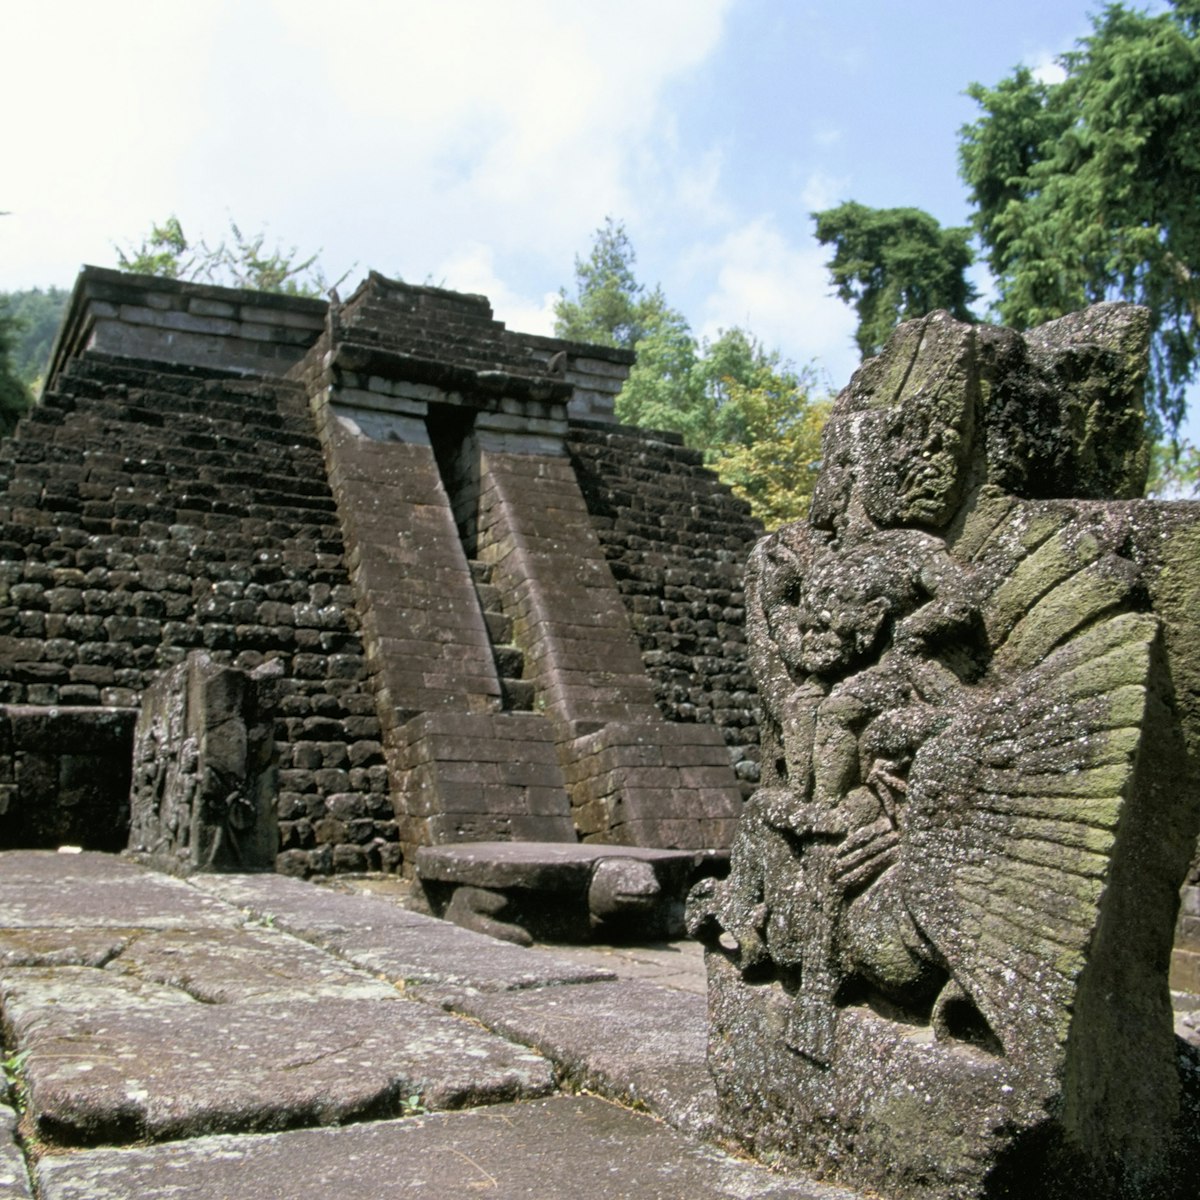 Garuda in front of the 15th century temple of Candi Sukuh, on slopes of Gunung Lawu, east of Solo, thought to be linked to fertiflity cult, island of Java, Indonesia, Southeast Asia, Asia